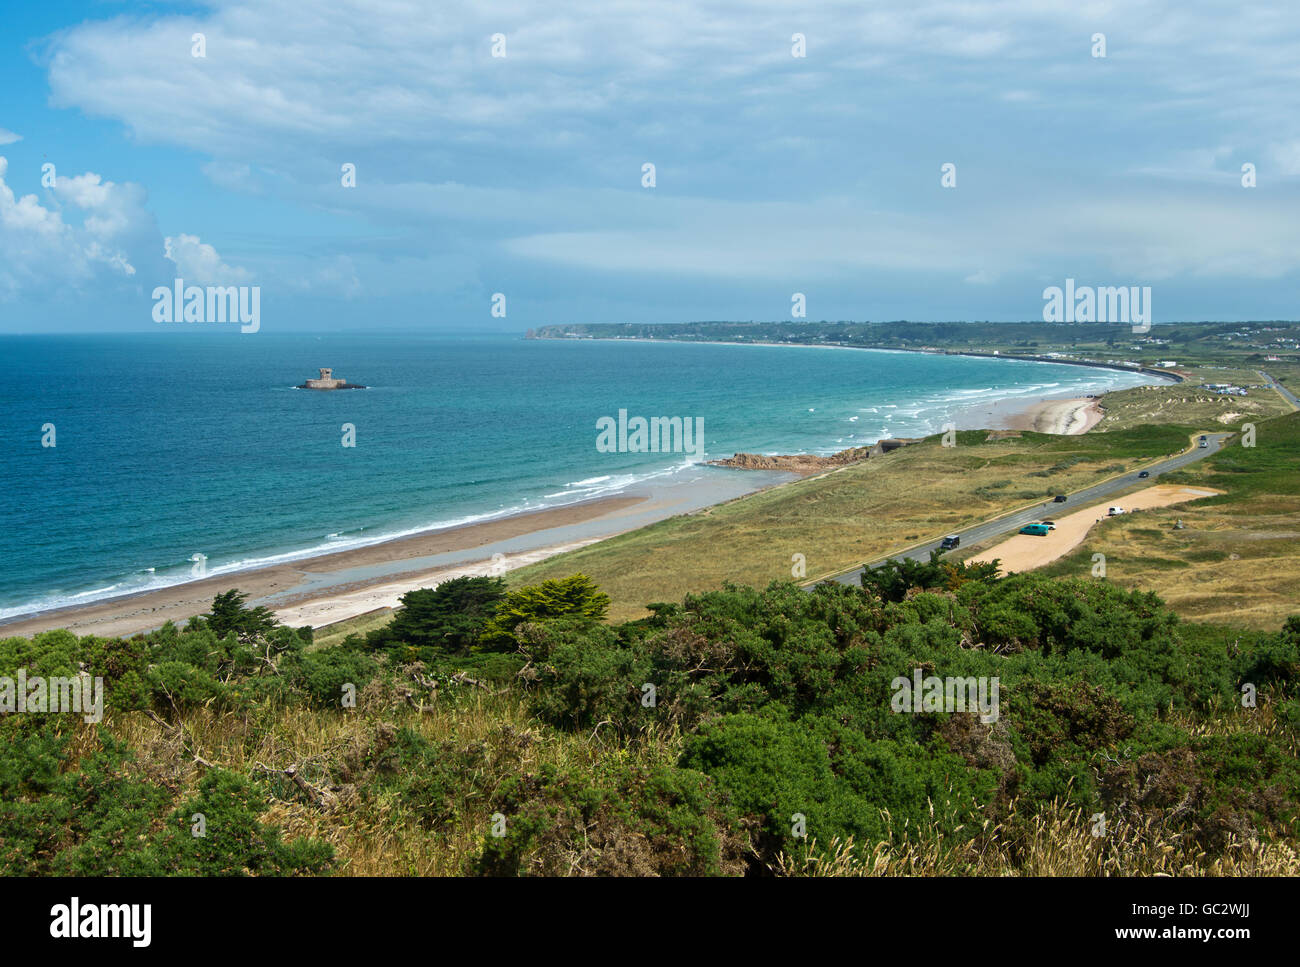 St Ouen's Bay, Jersey, Channel Island Stock Photo